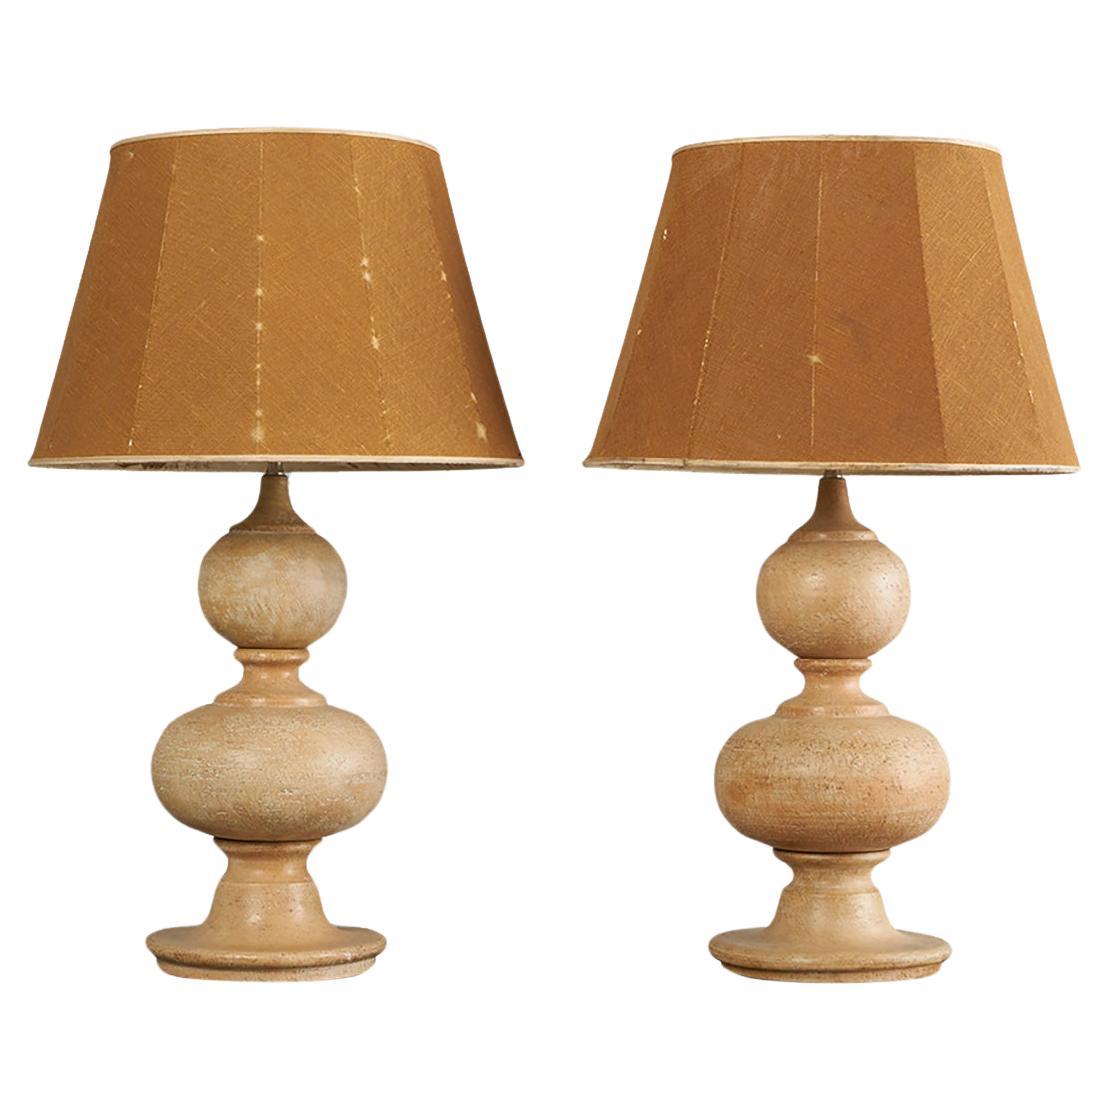 Monumental Pair of Earthenware Italian Ceramic Lamps by Ugo Zaccagnini 